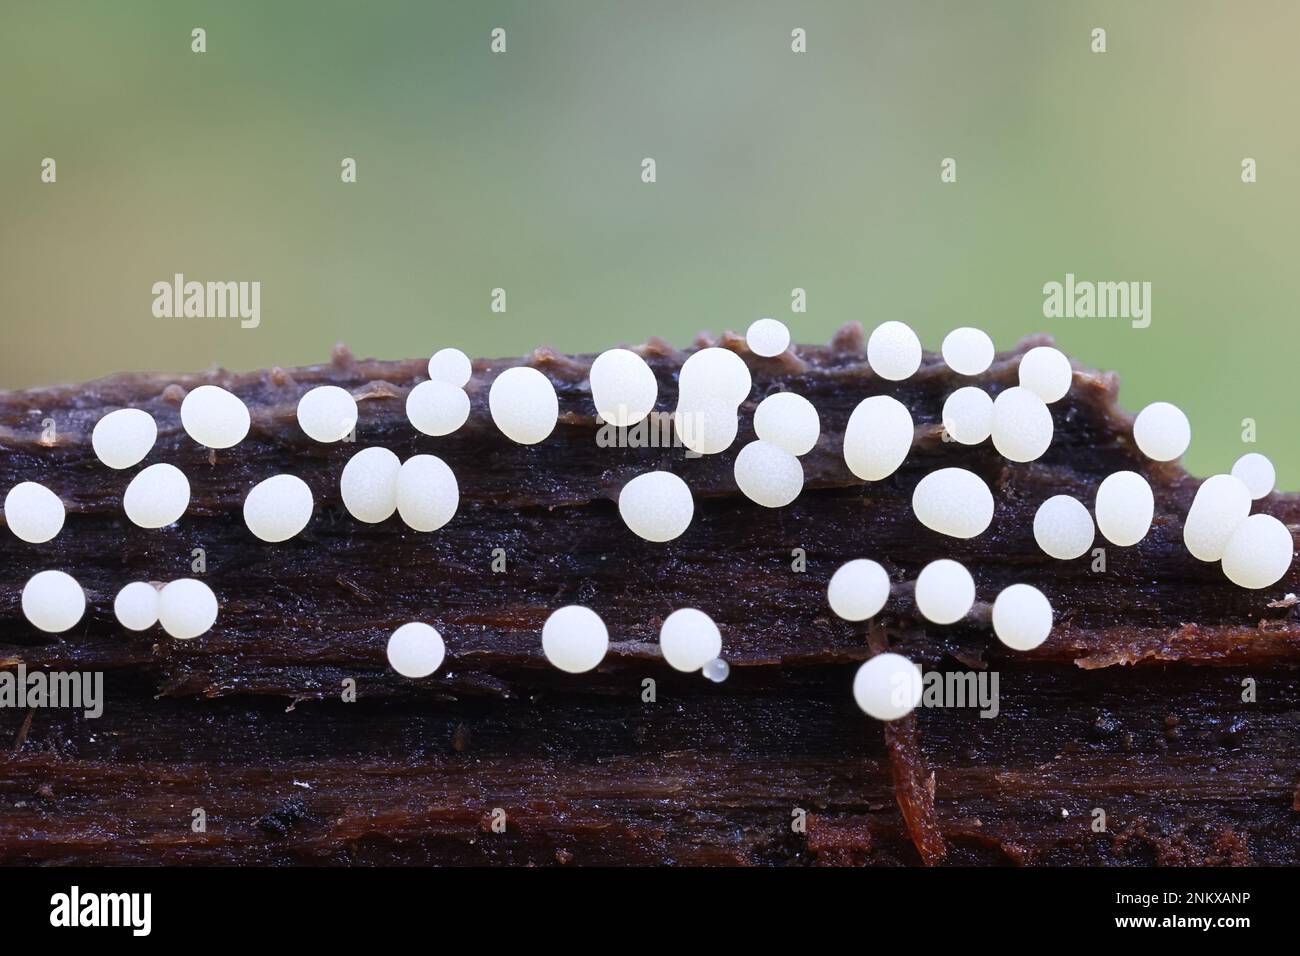 Physarum leucophaeum, slime mold from Finland, no common English name Stock Photo